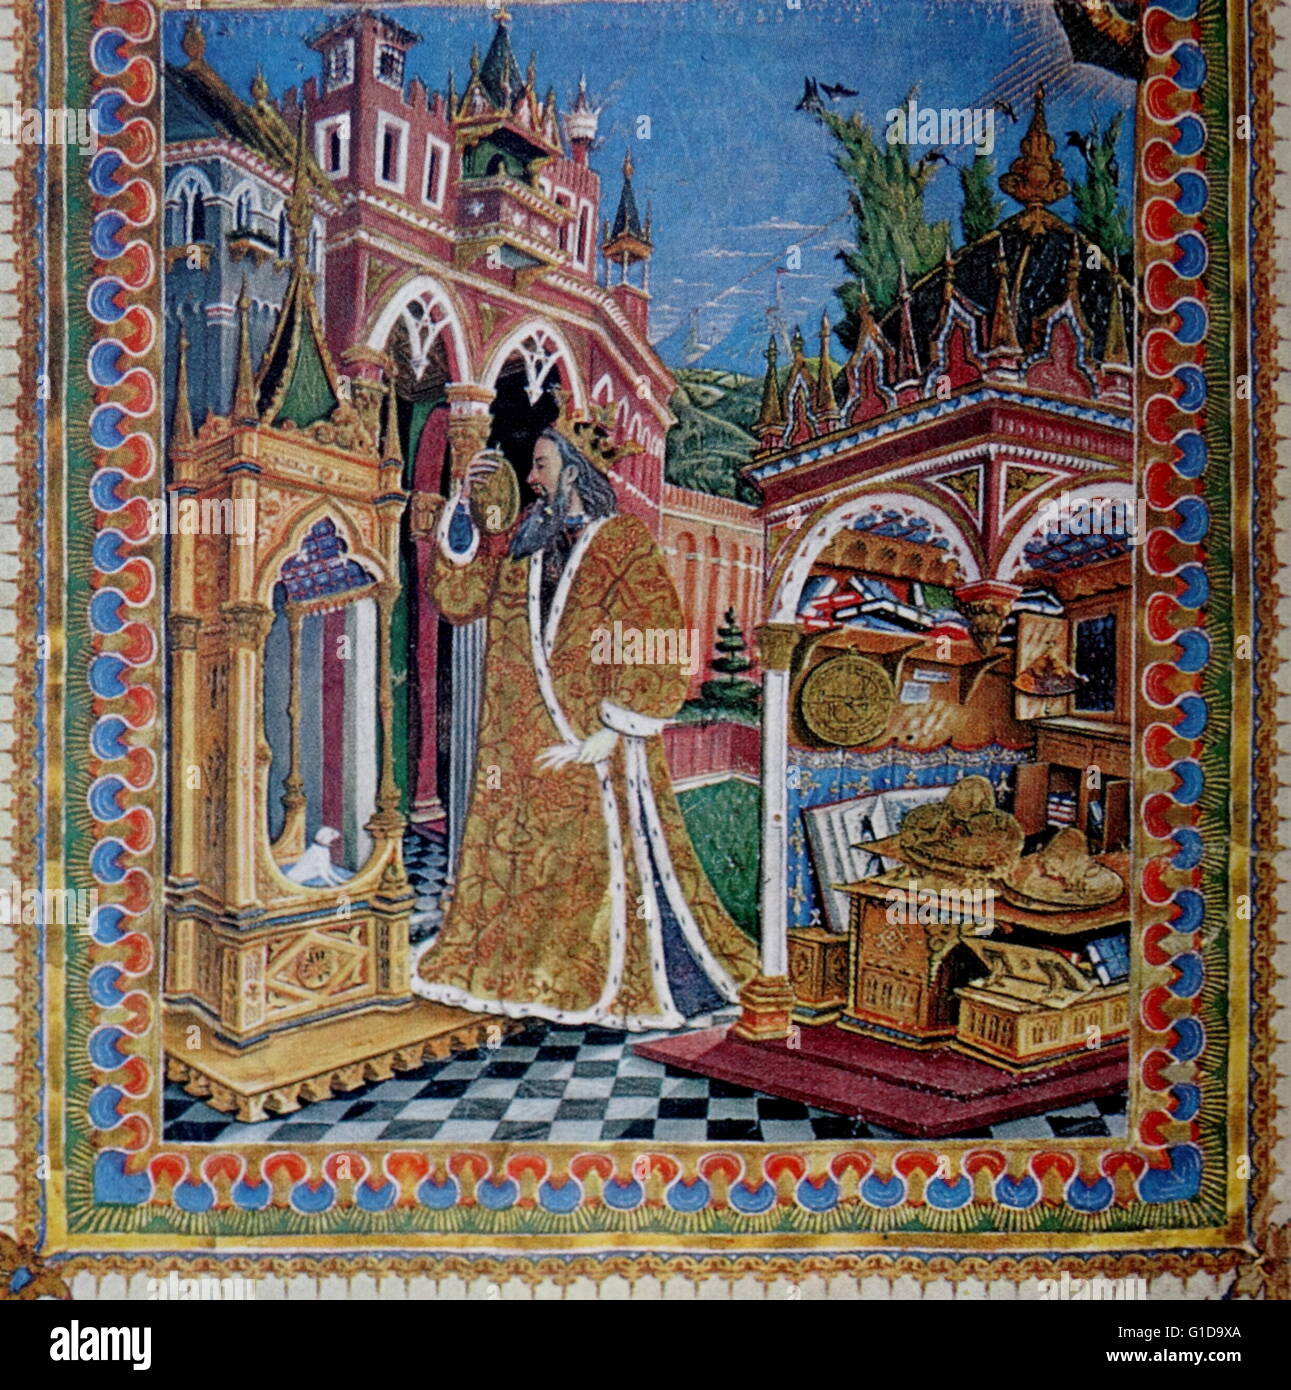 Portrait of Ptolemy, Geography, c. 1453. Biblioteca Nazionale Marciana, Cod. Giovanni Rhosos; copist for Cardinal Bessarion. Frontispiece of Ptolemy's Geographica showing Claudius Ptolemy in a Palace with books Stock Photo